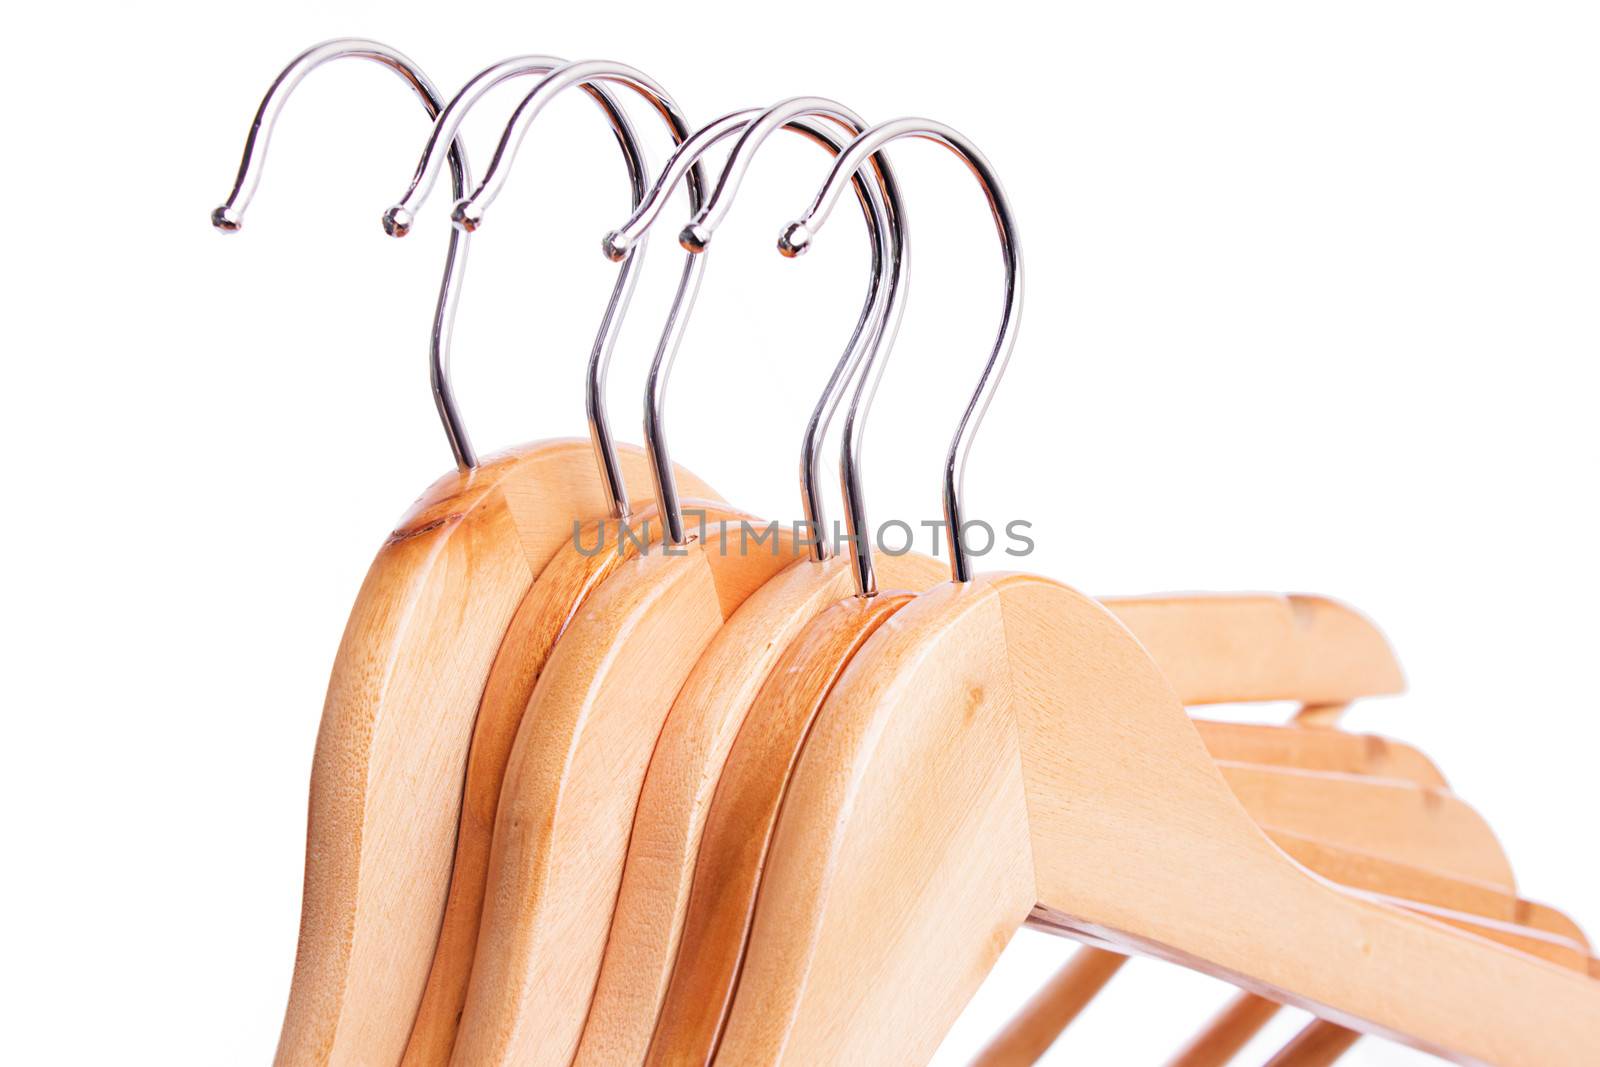 Some wooden hangers in raw isolated on white, sales concept